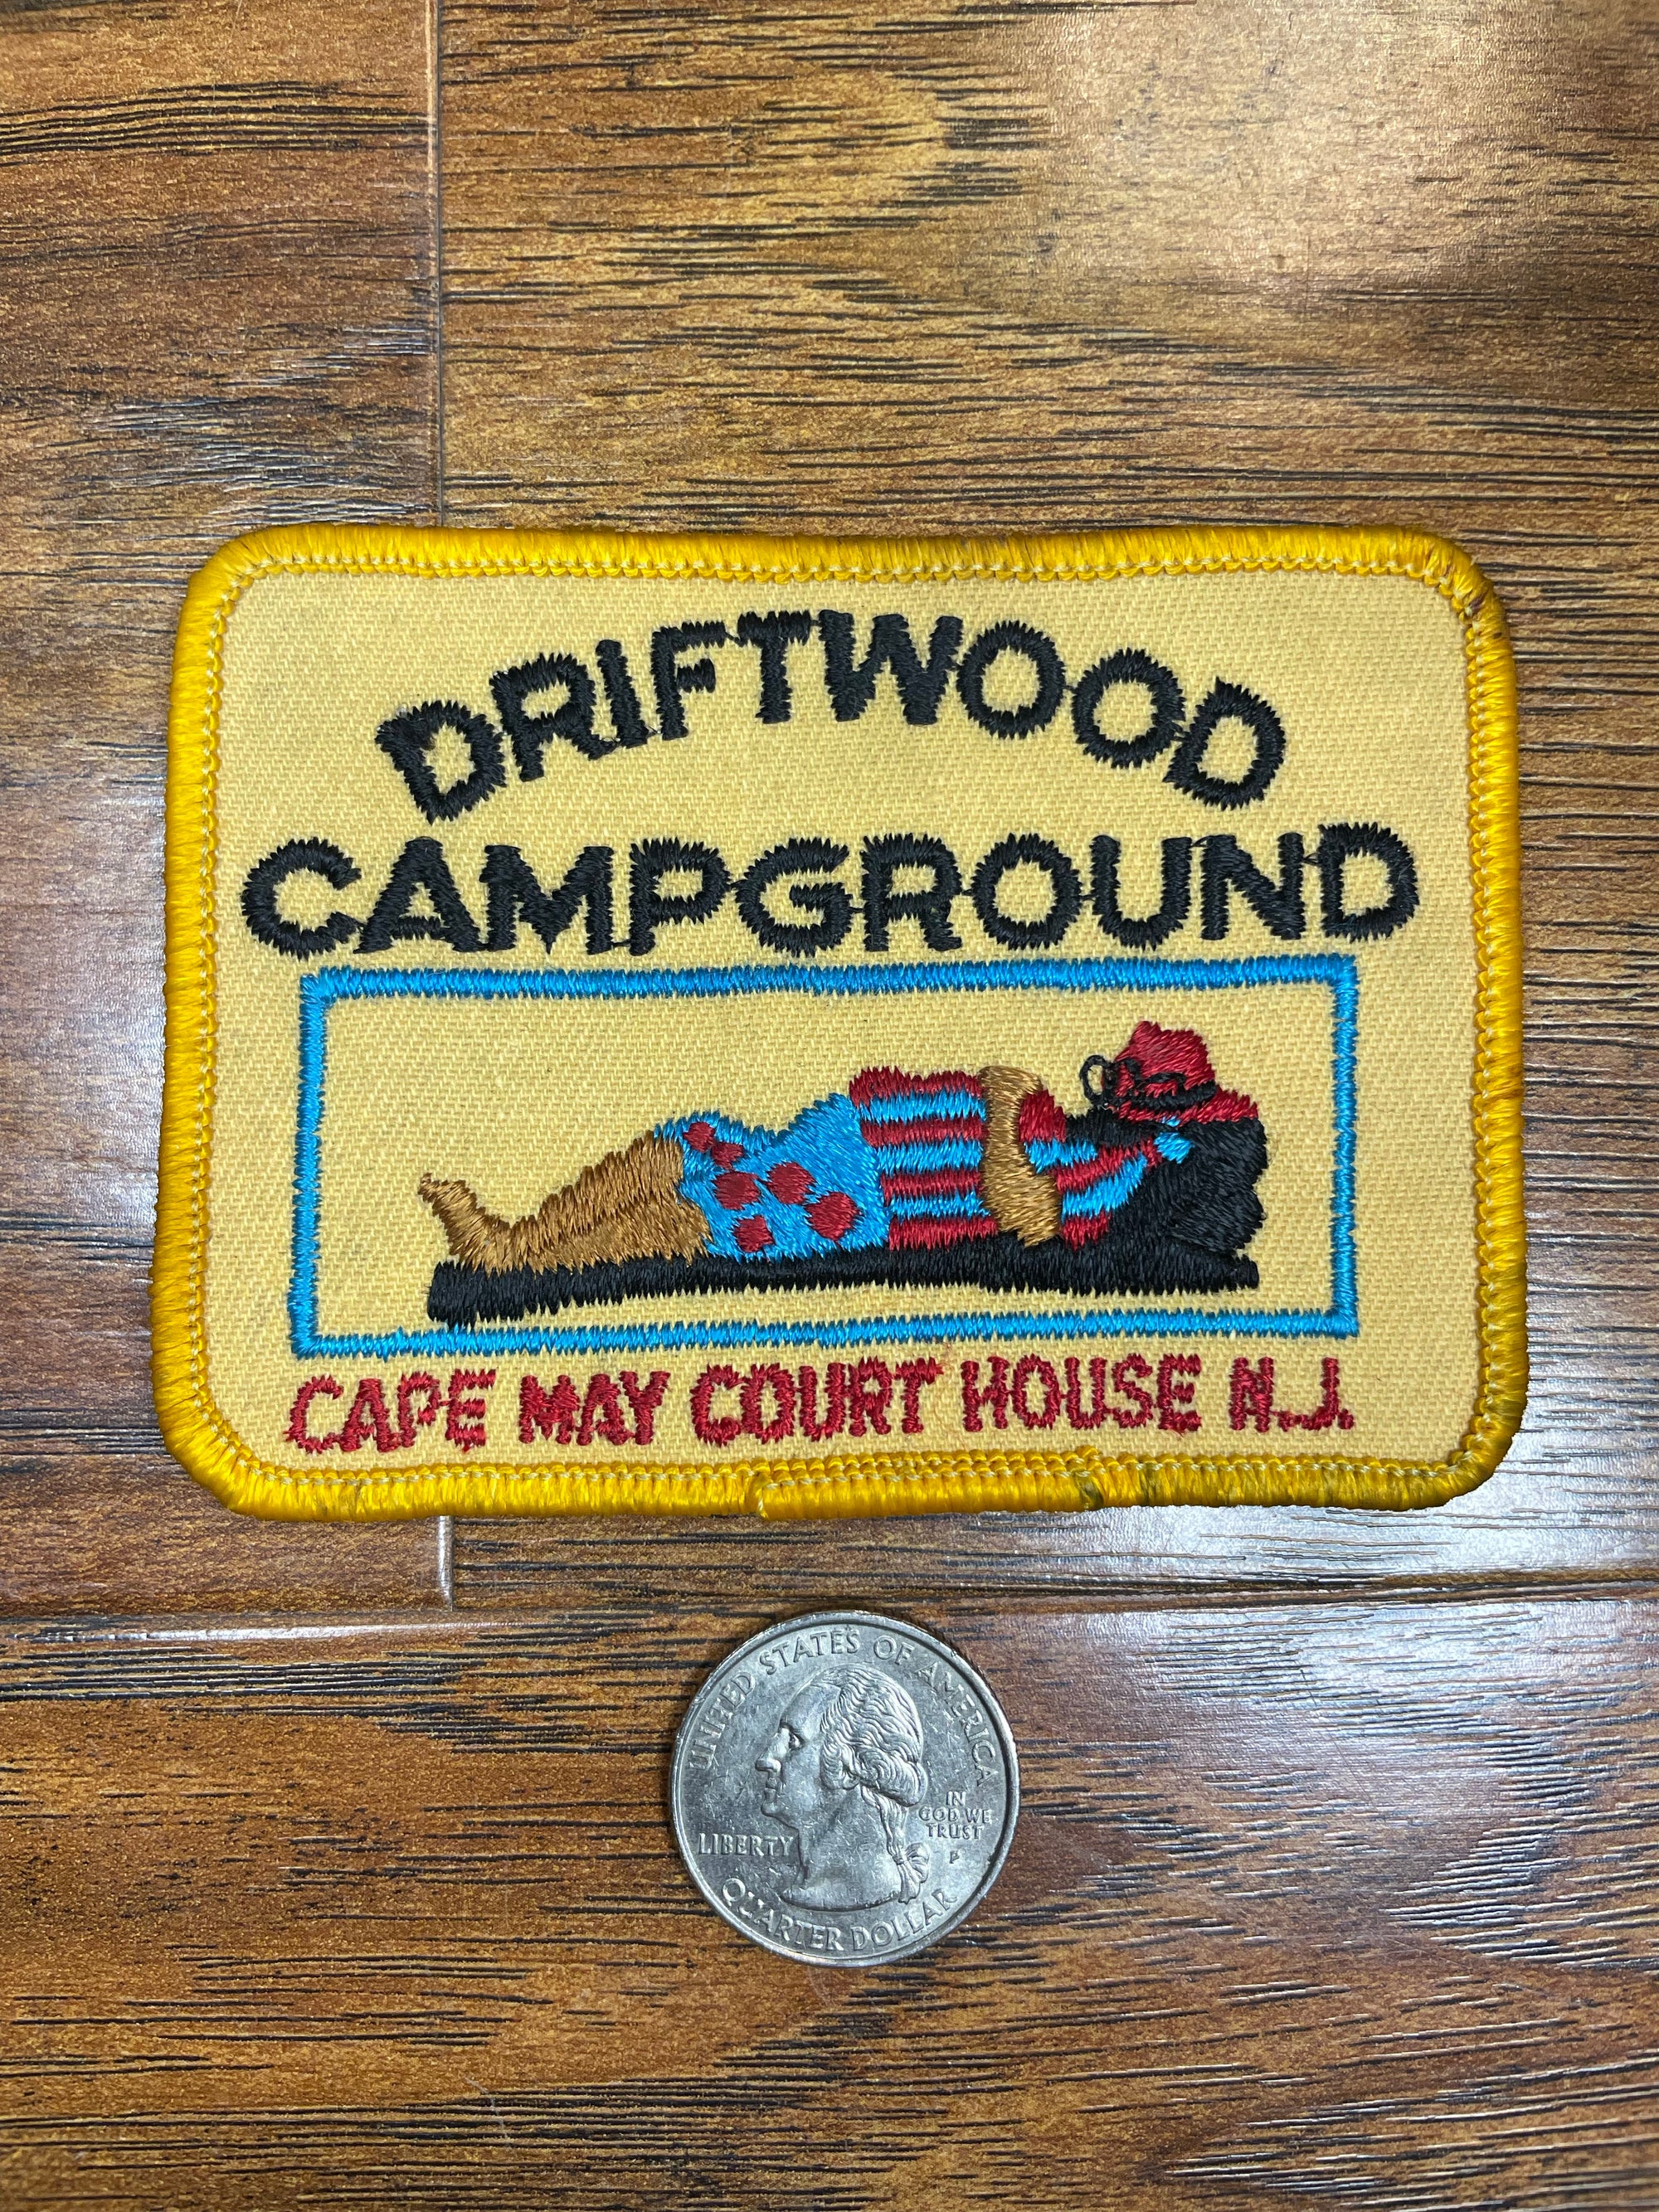 Vintage Driftwood Campground- Cape May Court House